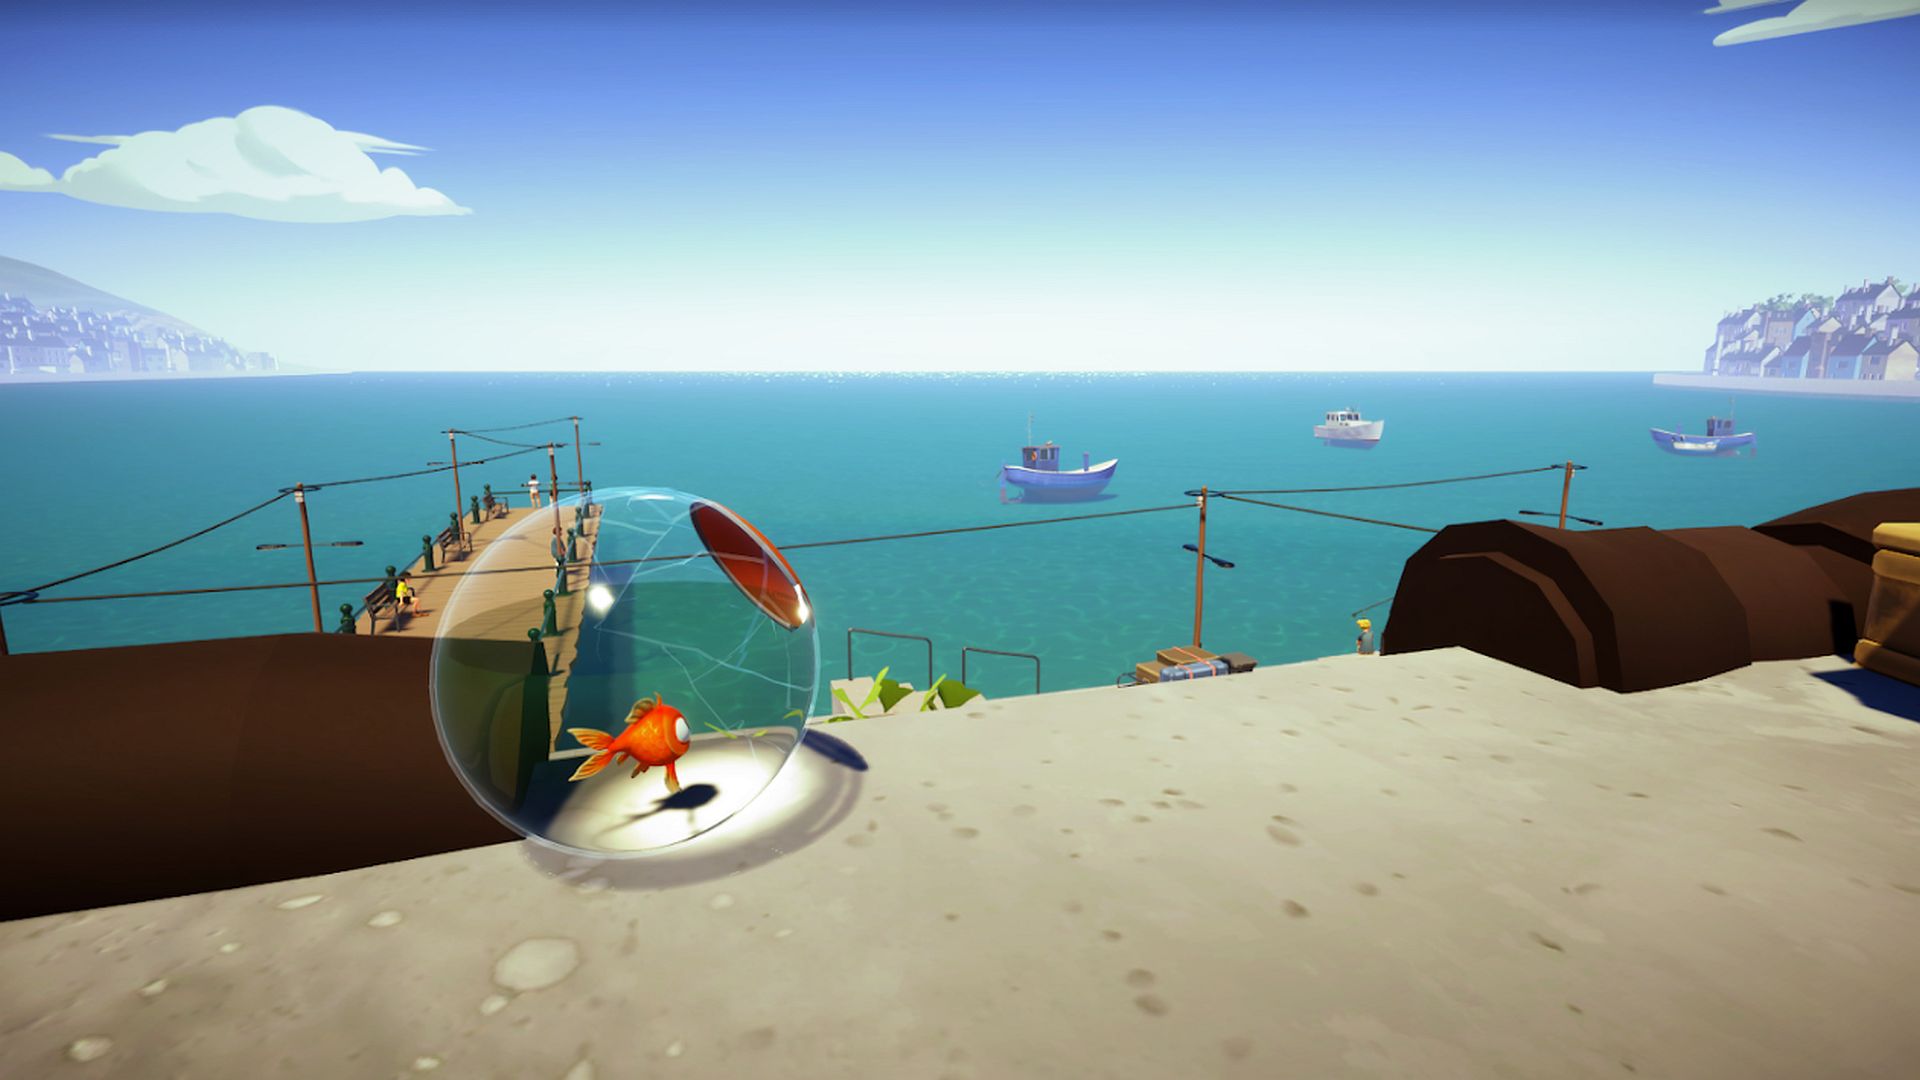 I Am Fish hits DreamHack Beyond with a demo, goodies, and Steam gift card giveaway